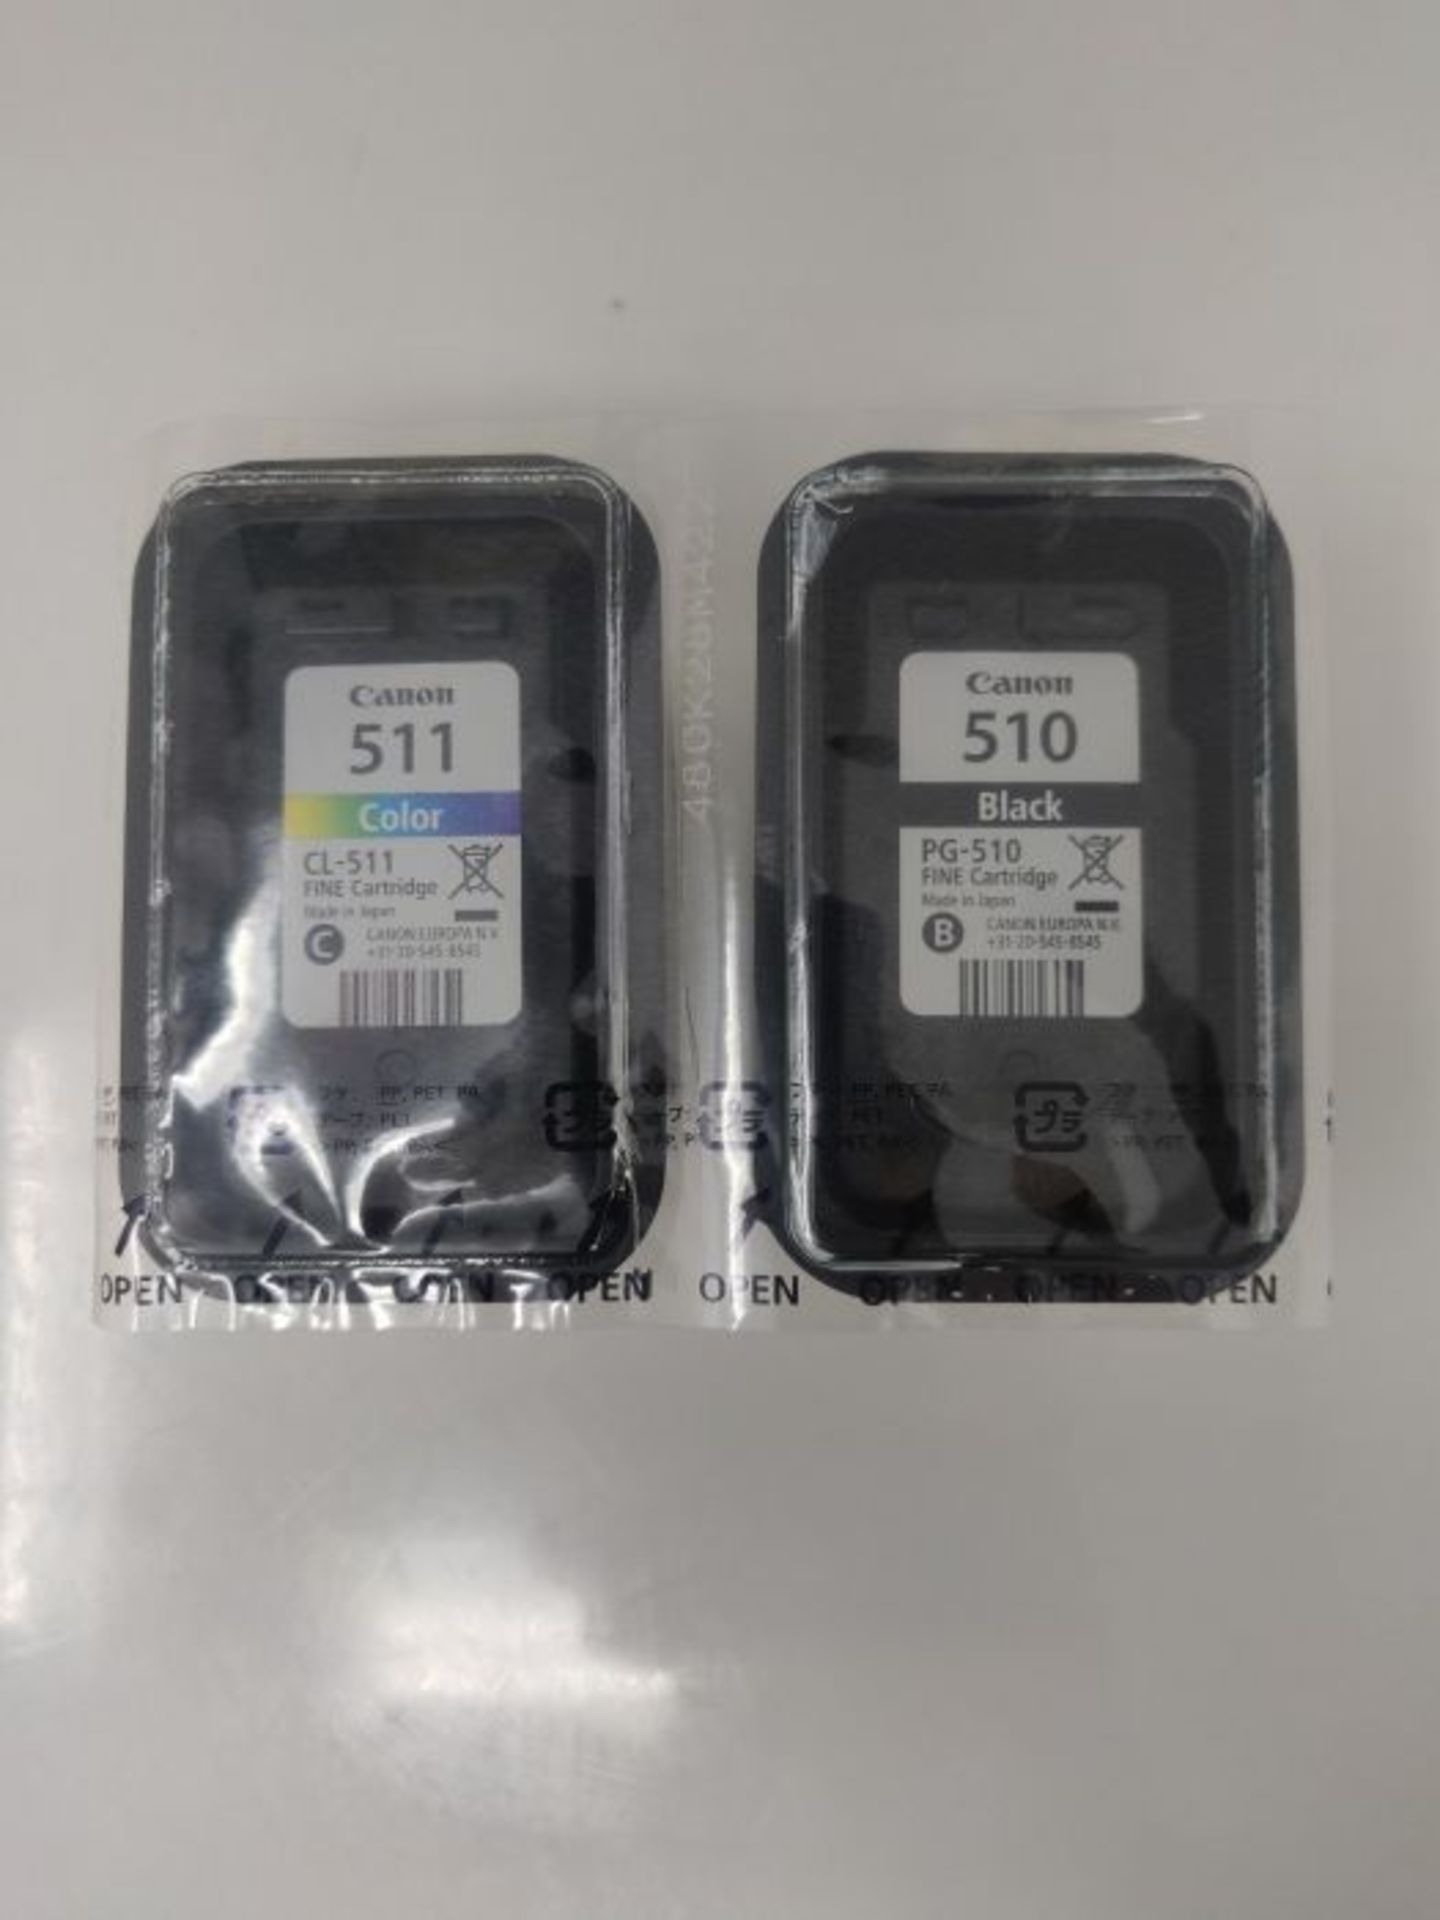 Canon PG-510 / CL-511 Black and color ink cartridge standard capacity black: 240 color - Image 3 of 3